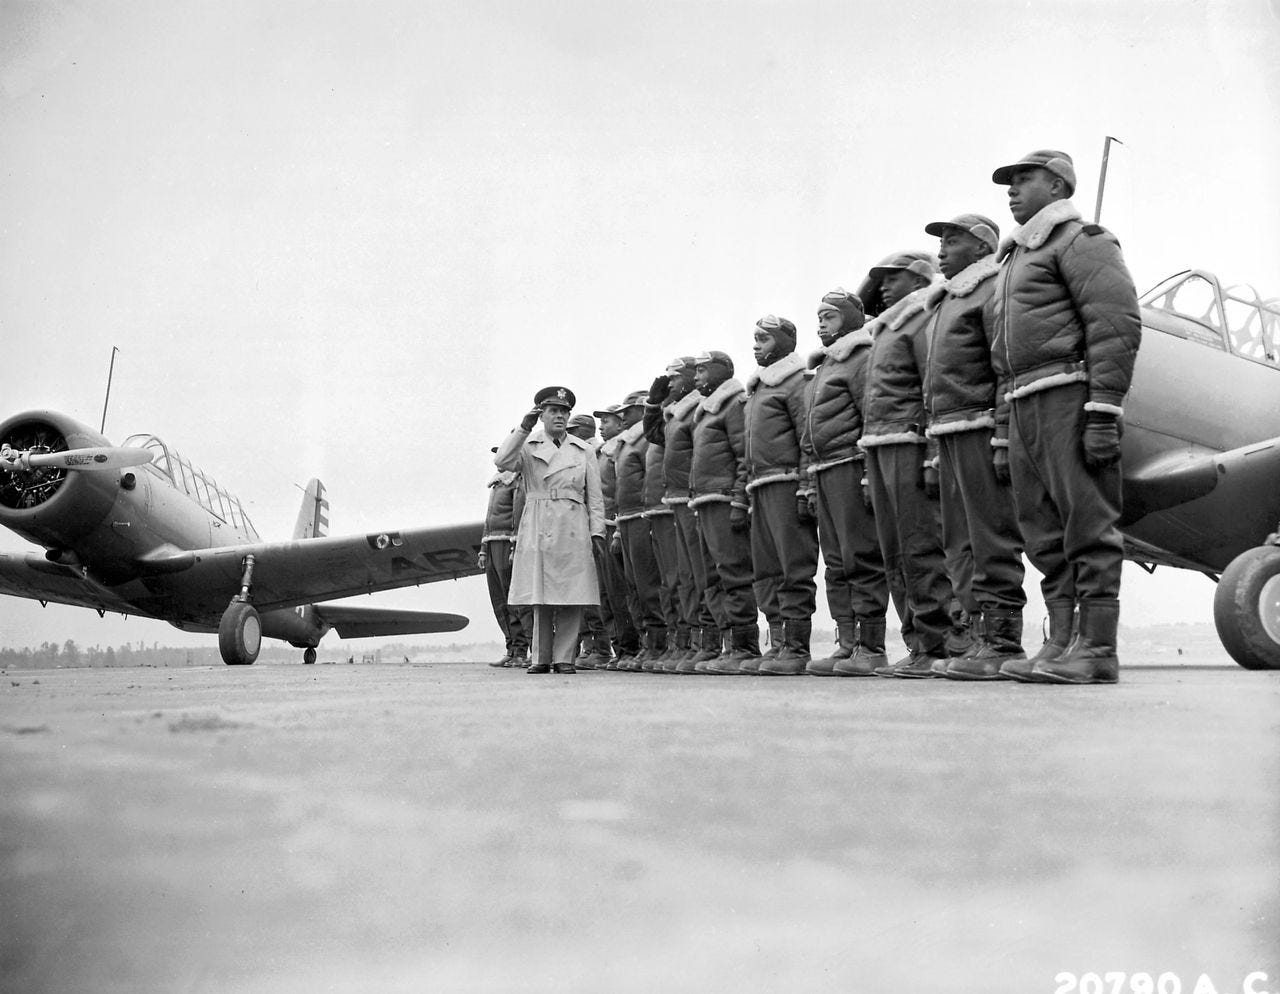 Mickey Markoff Air Sea Exec 2024 — black and white photo of Tuskegee Airmen in uniform in front of military aircraft. Men wearing bomber jackets and hats with other person wearing trench coat and hat. Posted on 2024 Mickey Markoff article on black history month in aviation